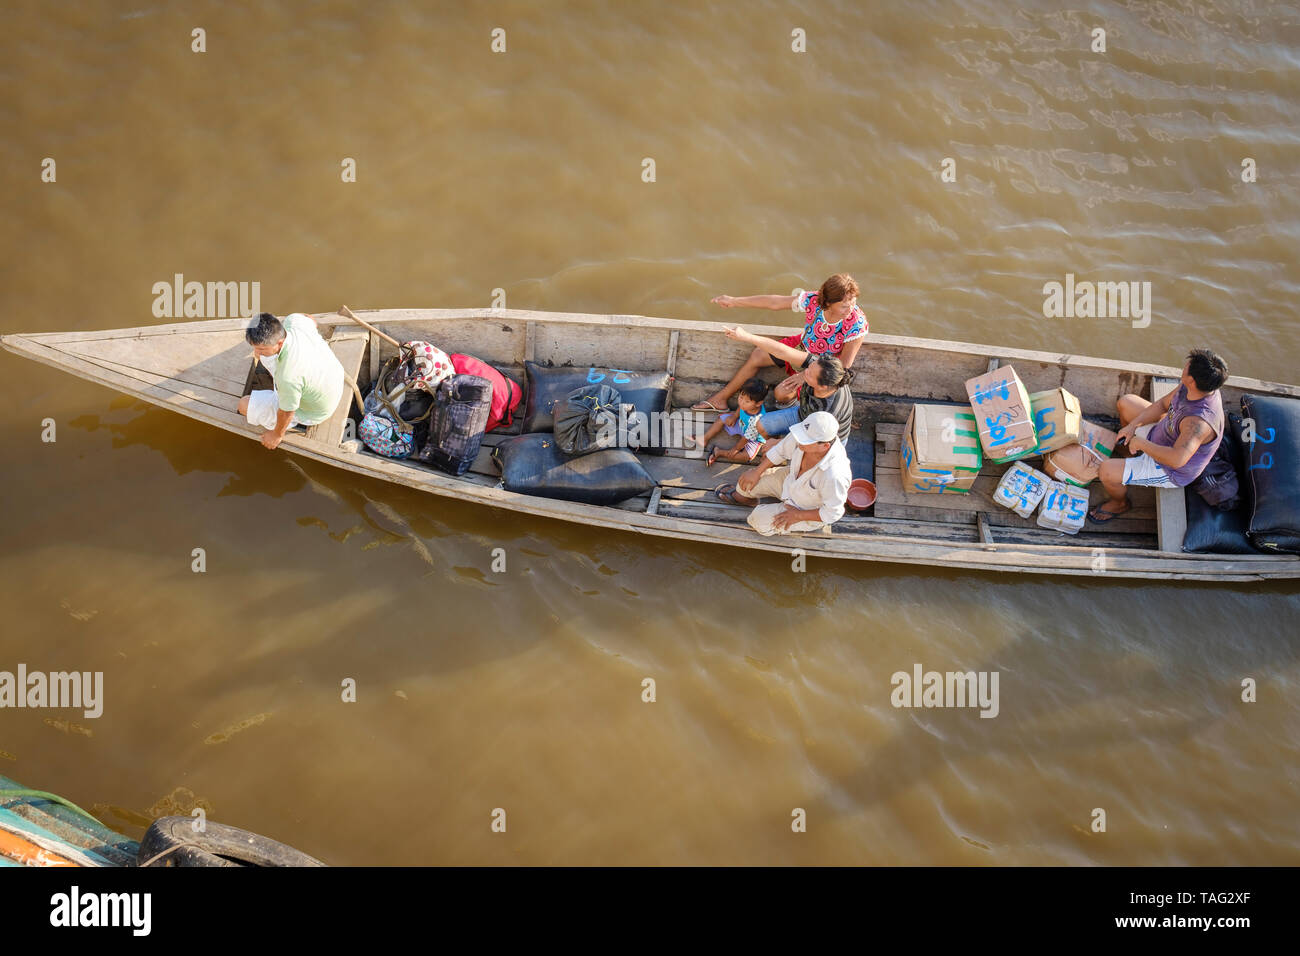 Passengers boarding from a boat the ferry Iquitos-Pucallpa in the Ucayali River, Peruvian Amazon Basin, Peru Stock Photo